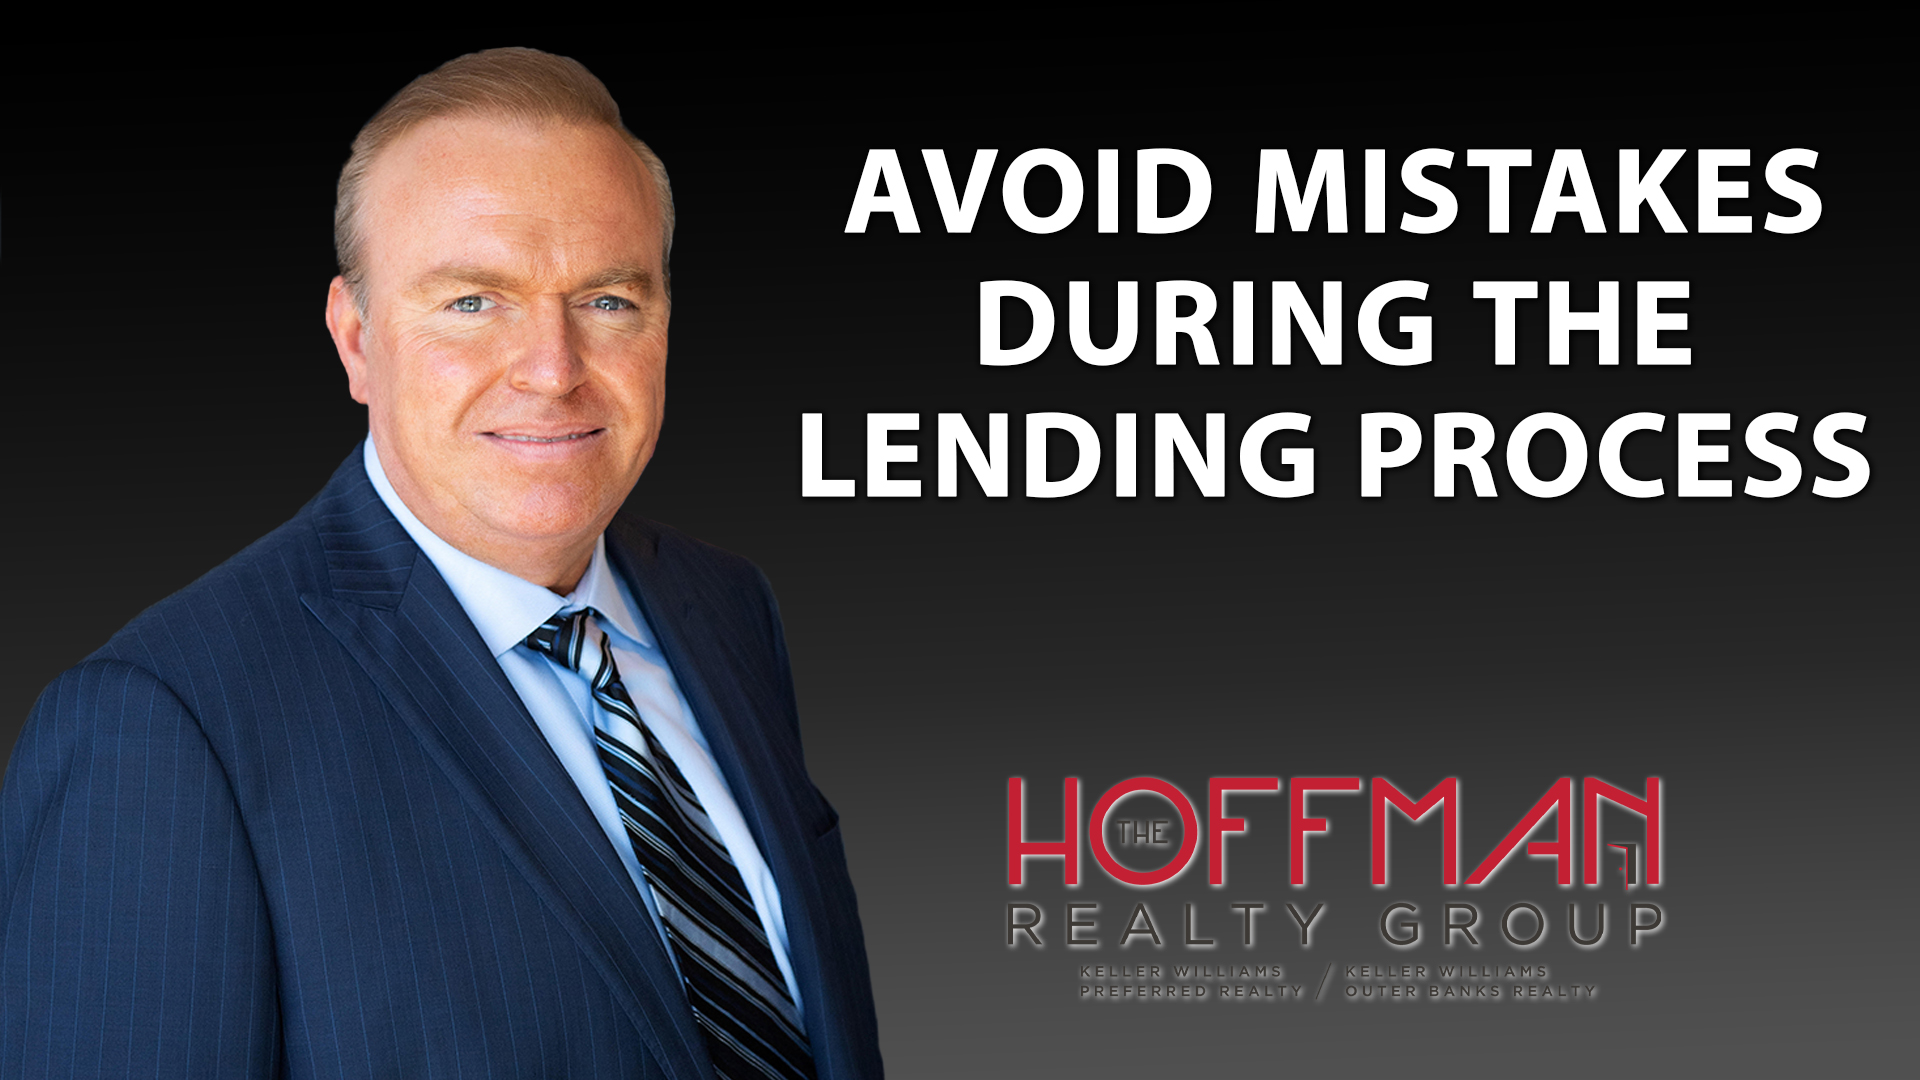 What Not To Do During the Lending Process